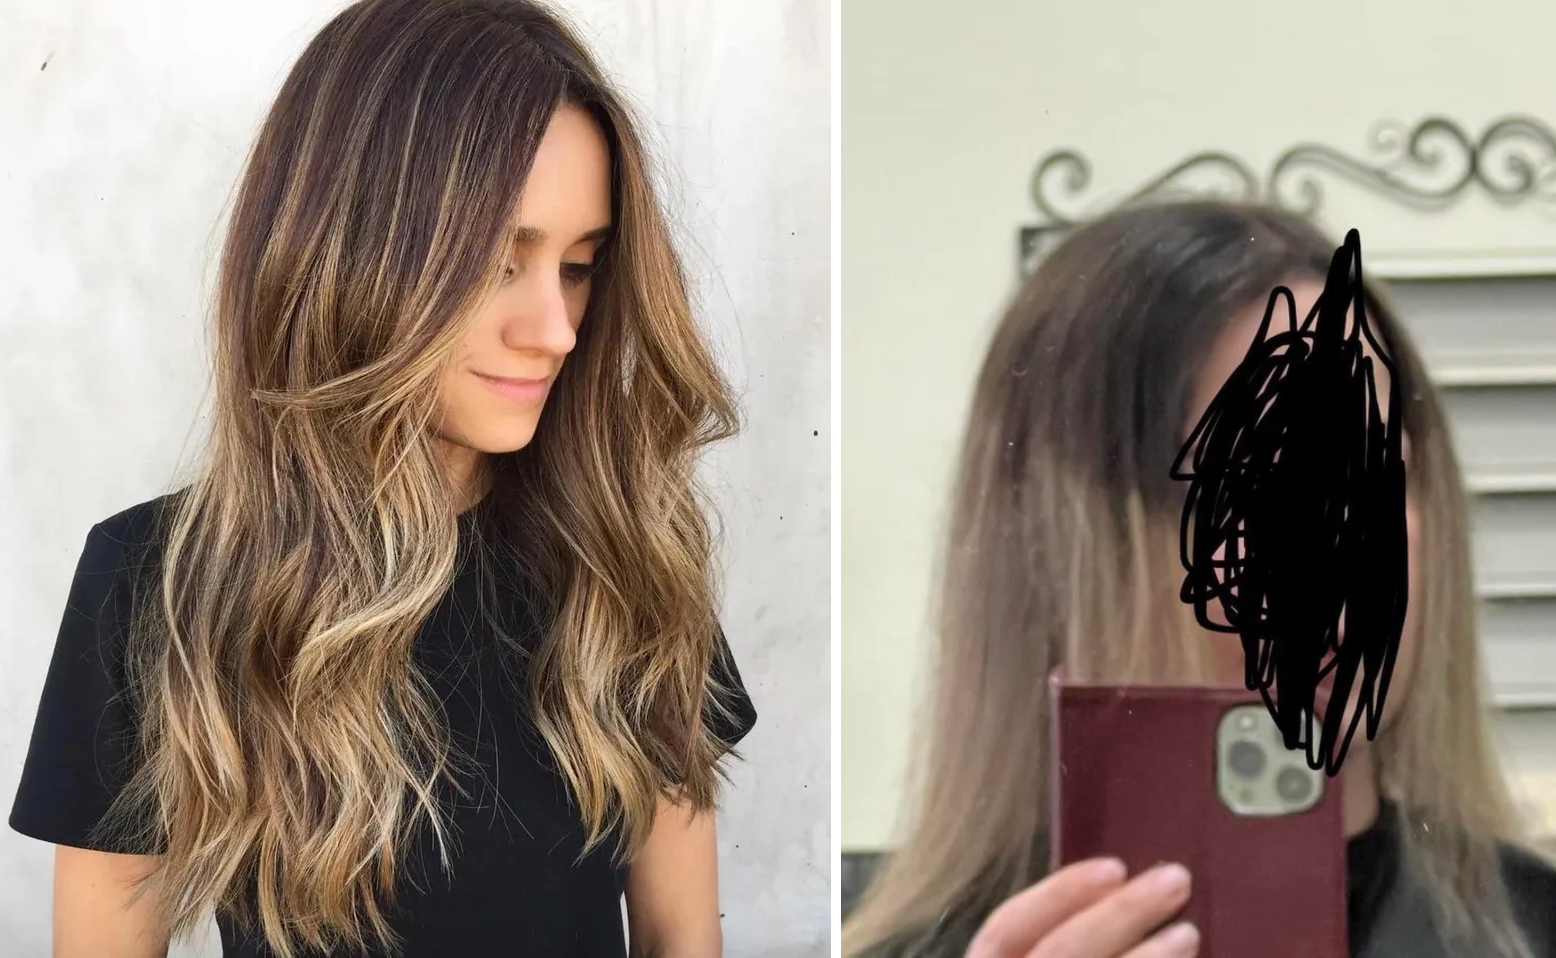 Expectations versus reality: 12 photos of unsuccessful hair coloring